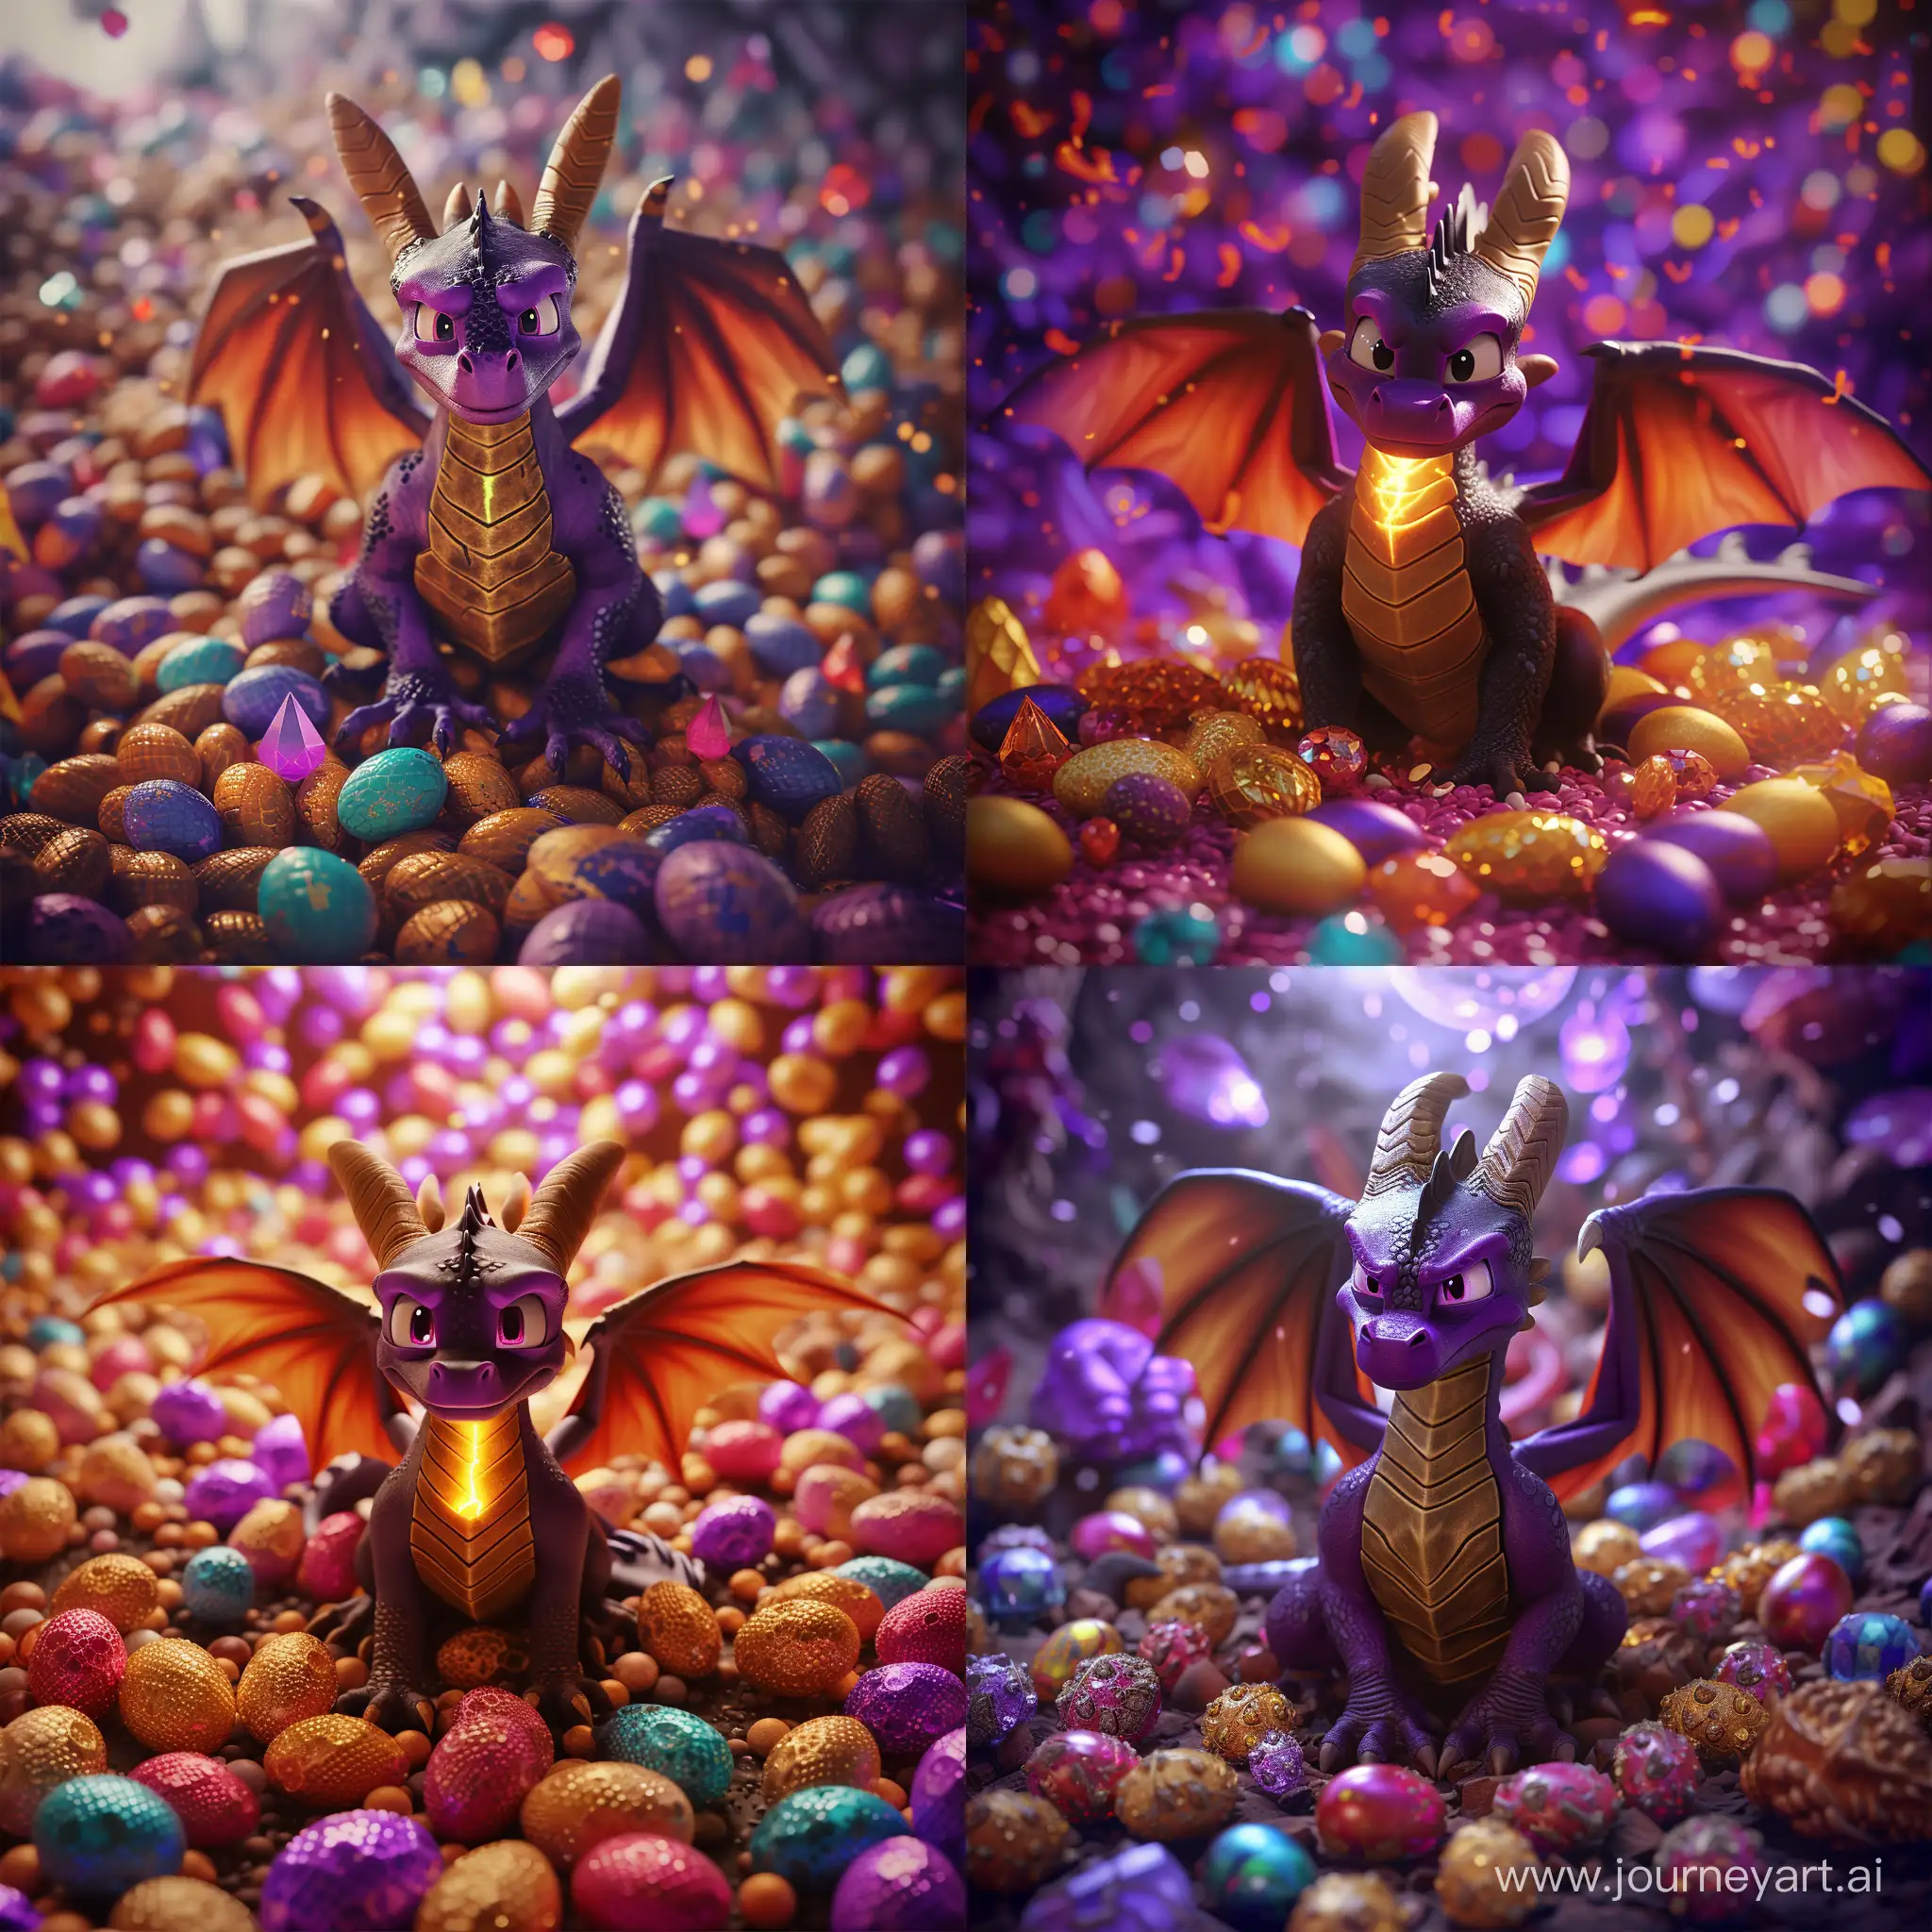 Majestic-Adult-Spyro-Dragon-Surrounded-by-Multicolored-Gems-and-Eggs